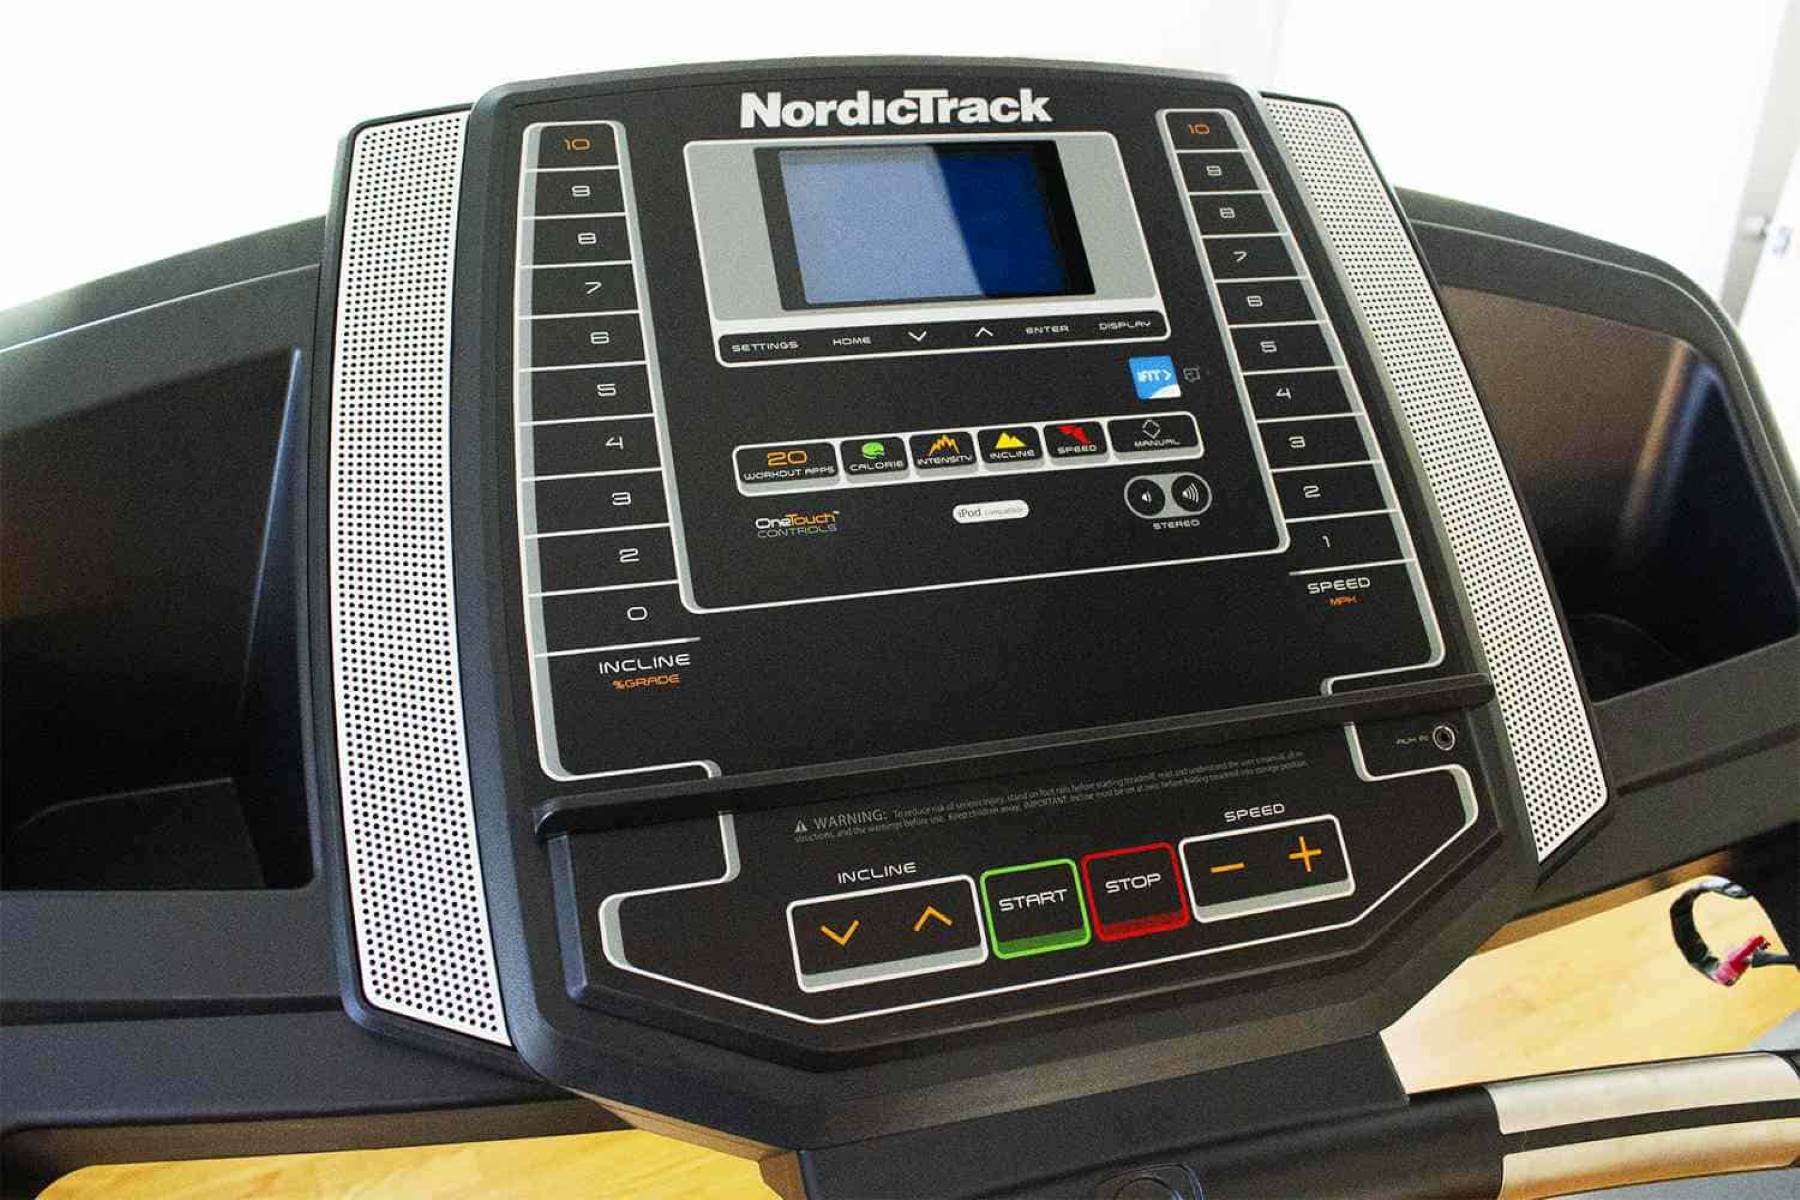 How Do You Reset A NordicTrack Treadmill